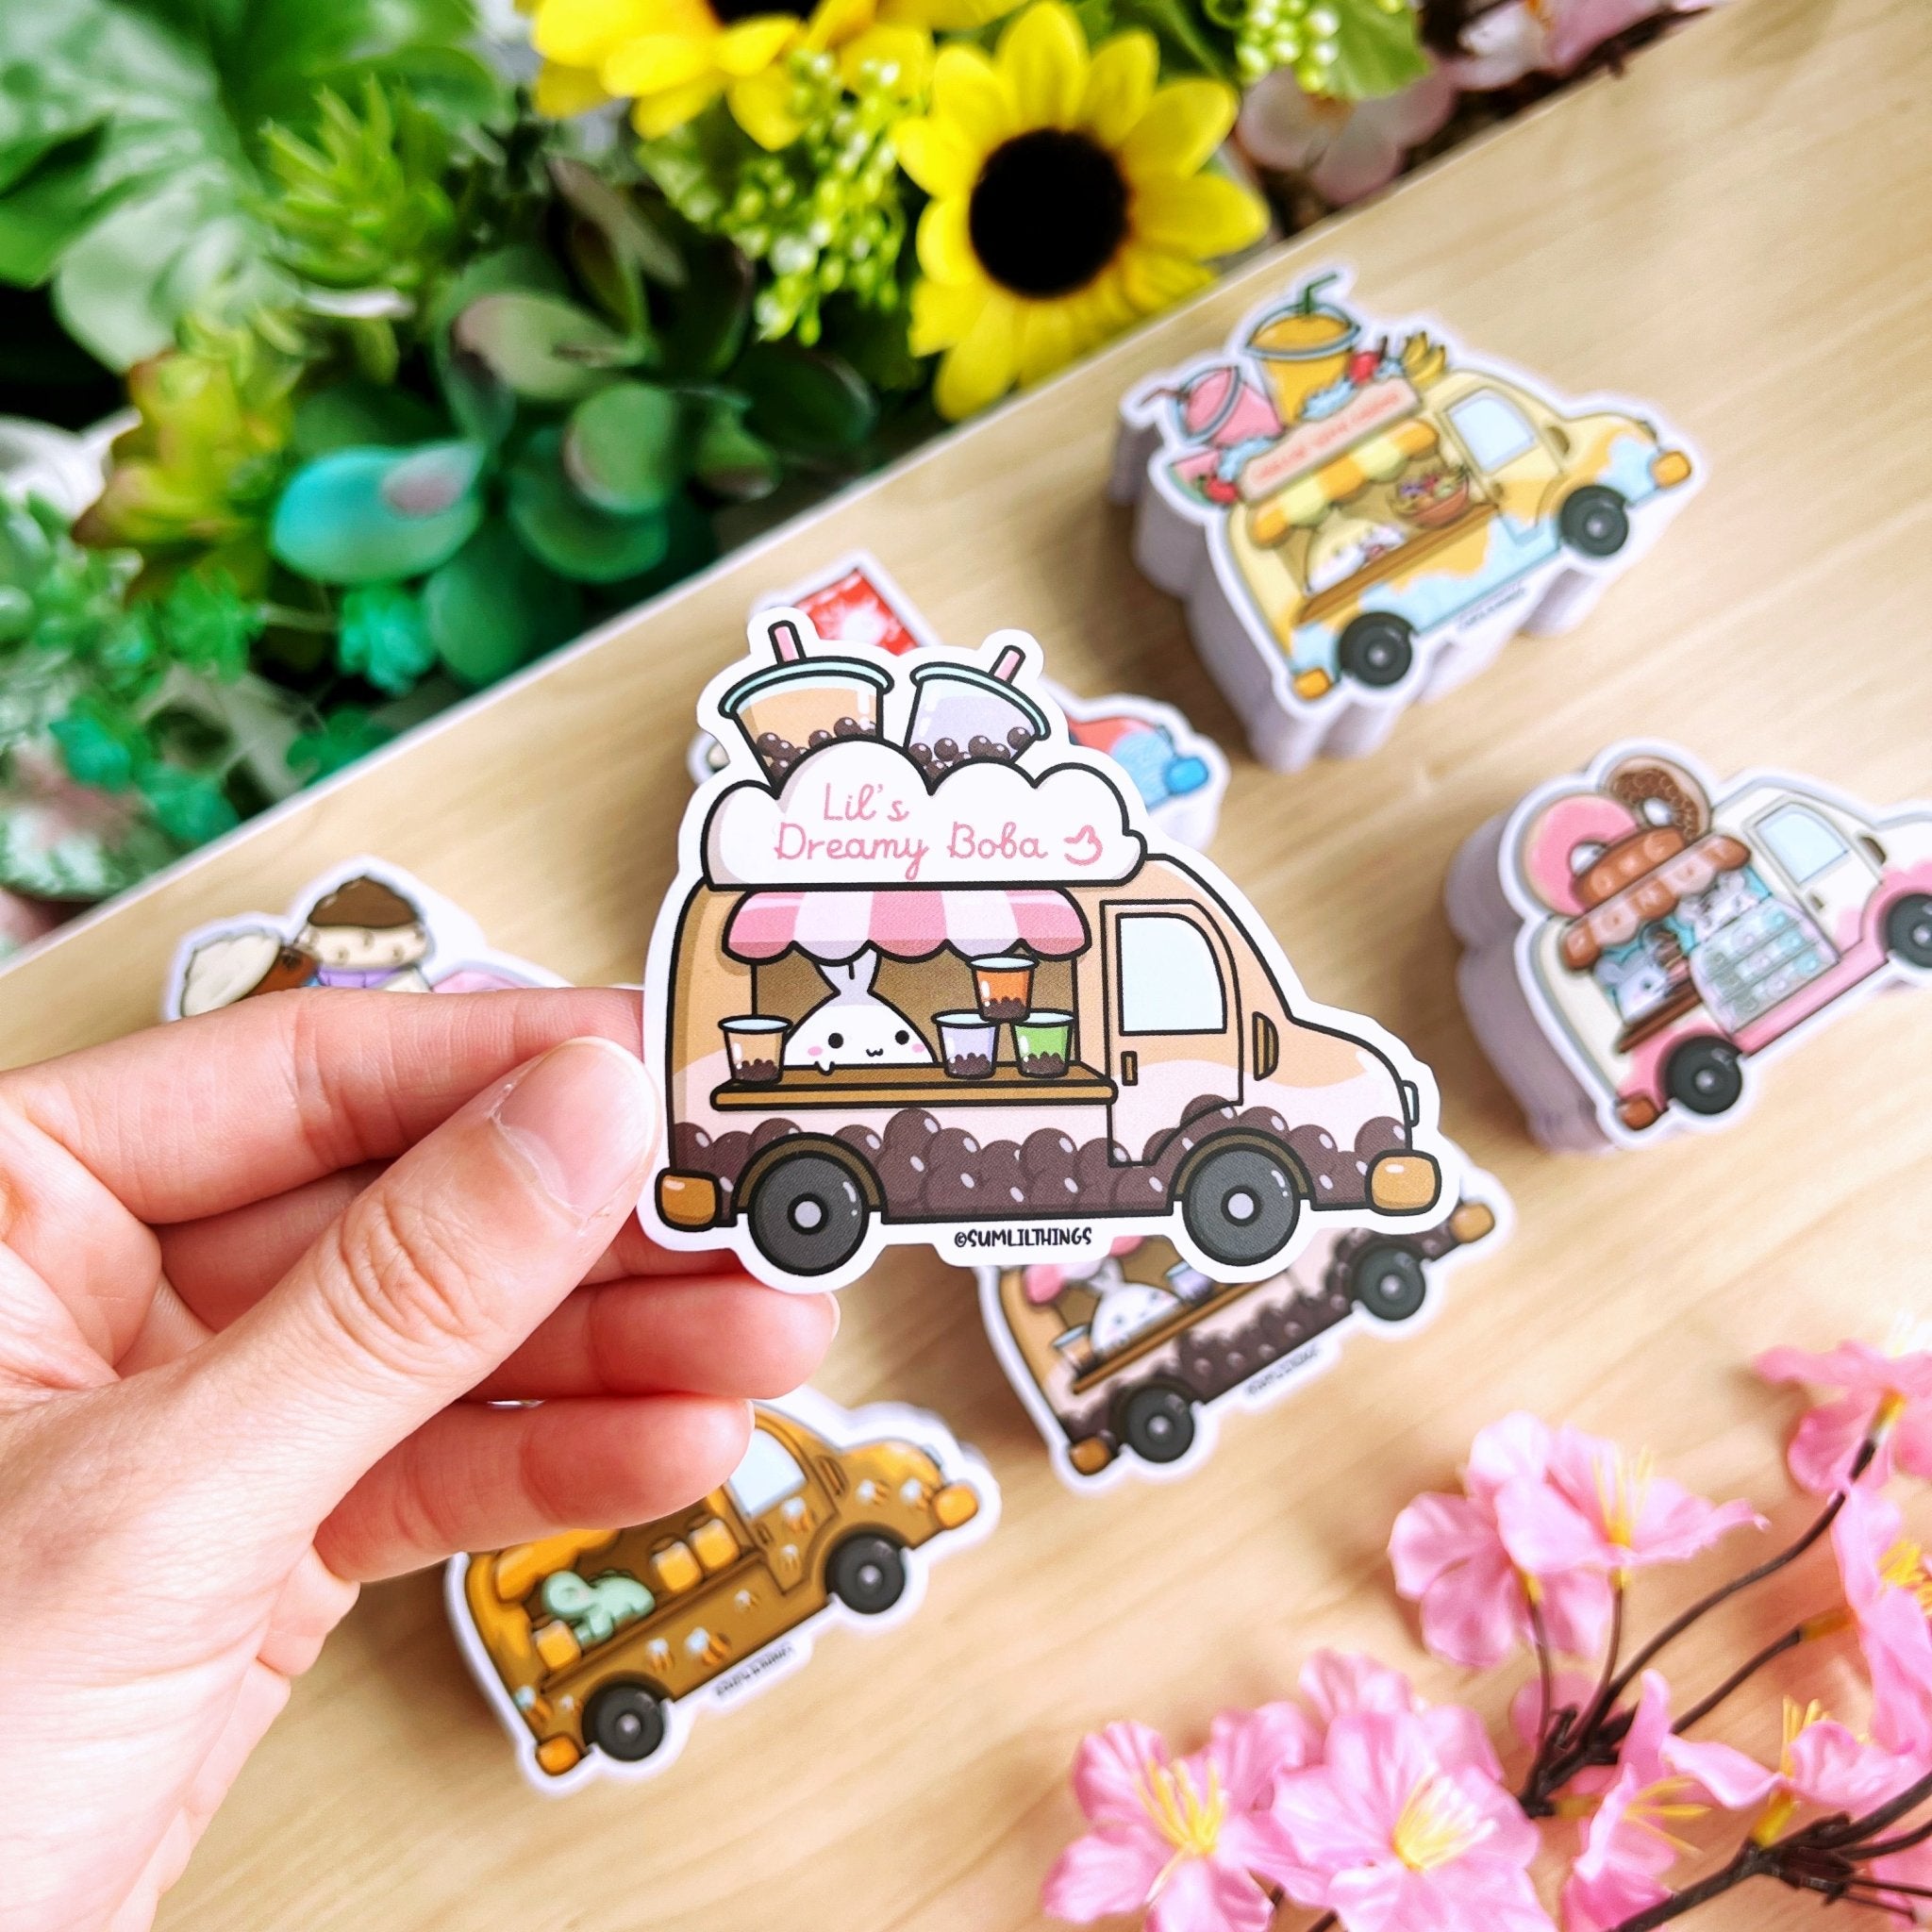 Holiday Mood Stickers – SumLilThings